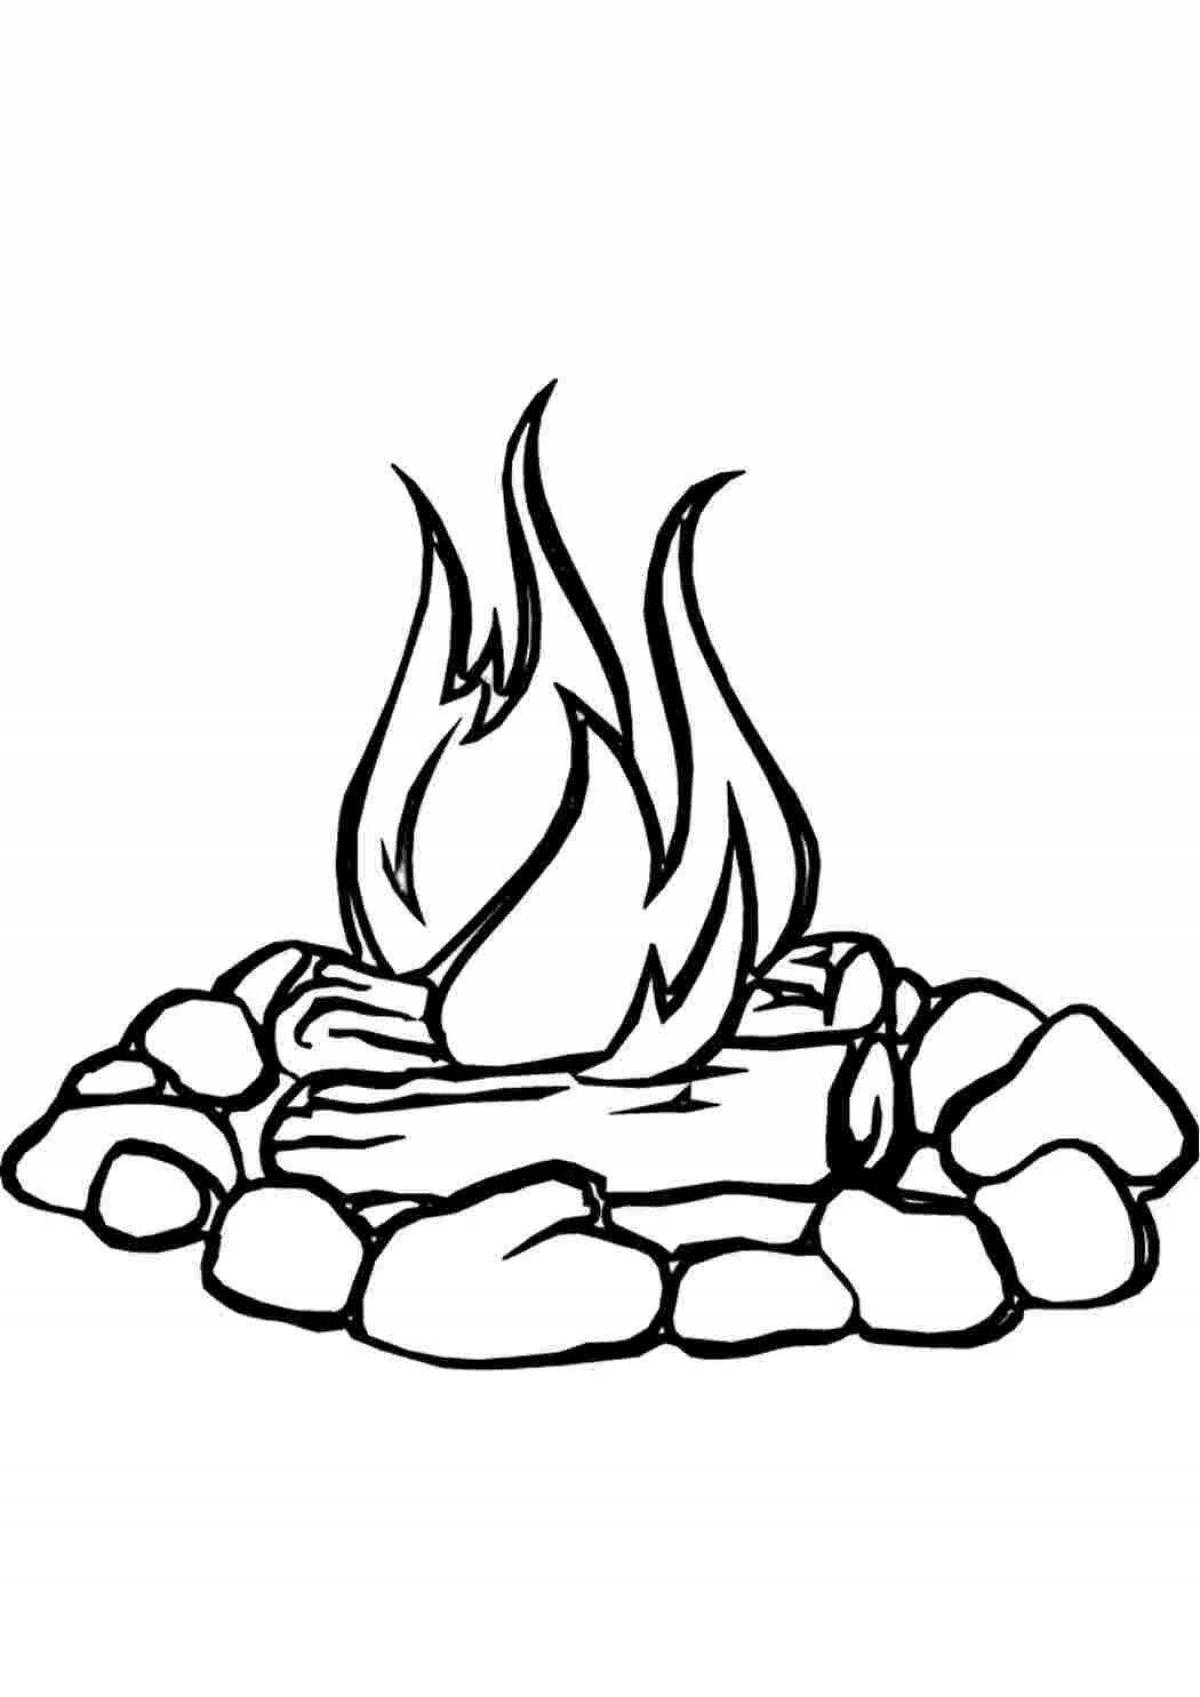 Splendid fire flame coloring book for kids